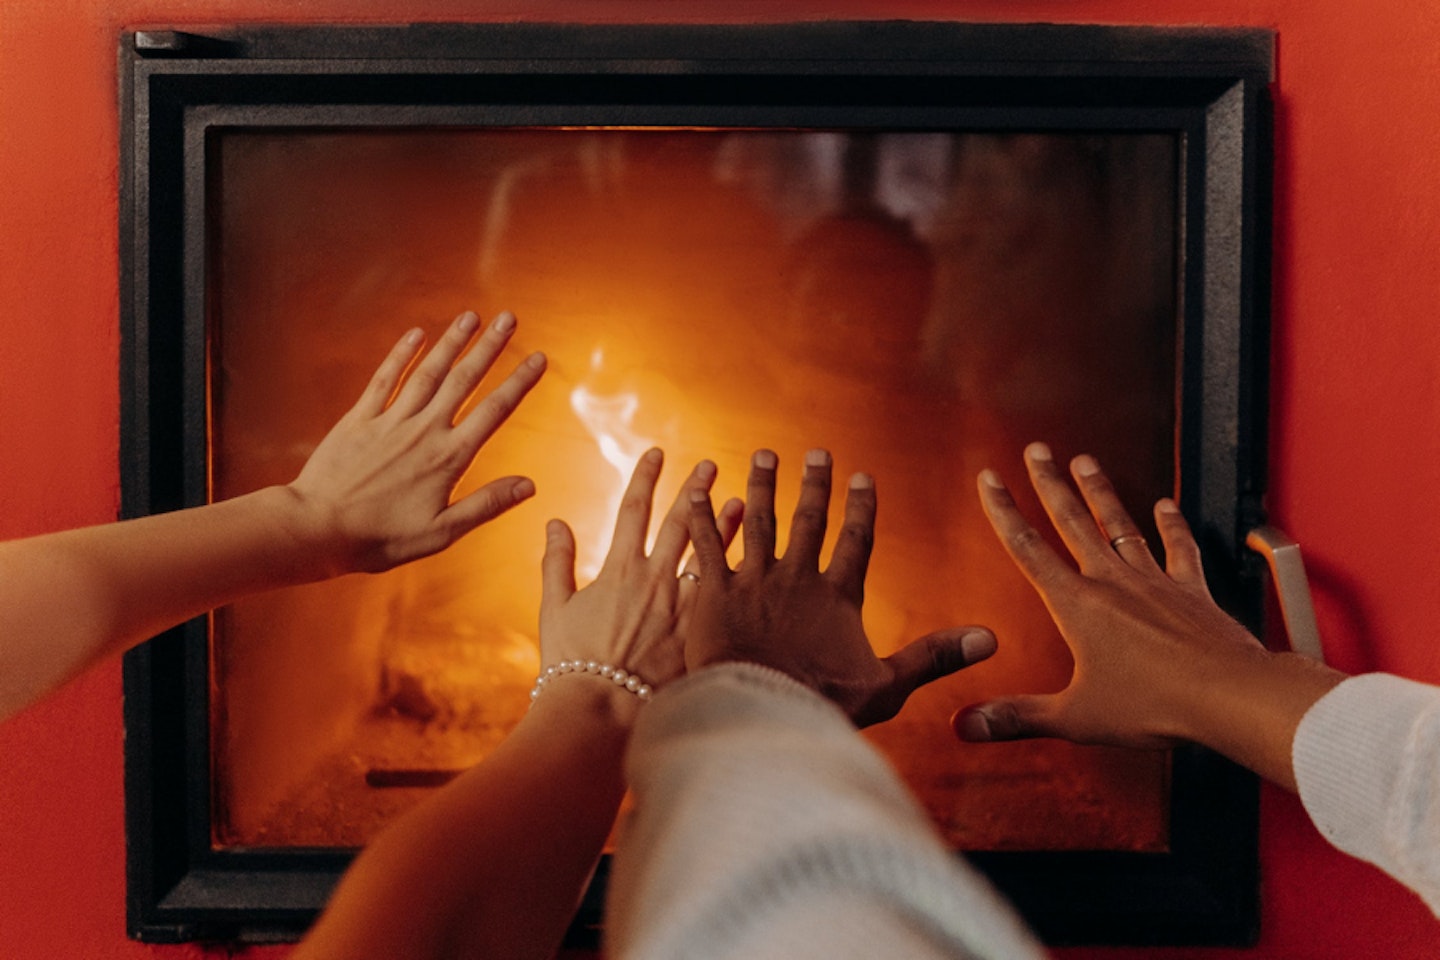 A family gathered around an electric fireplace